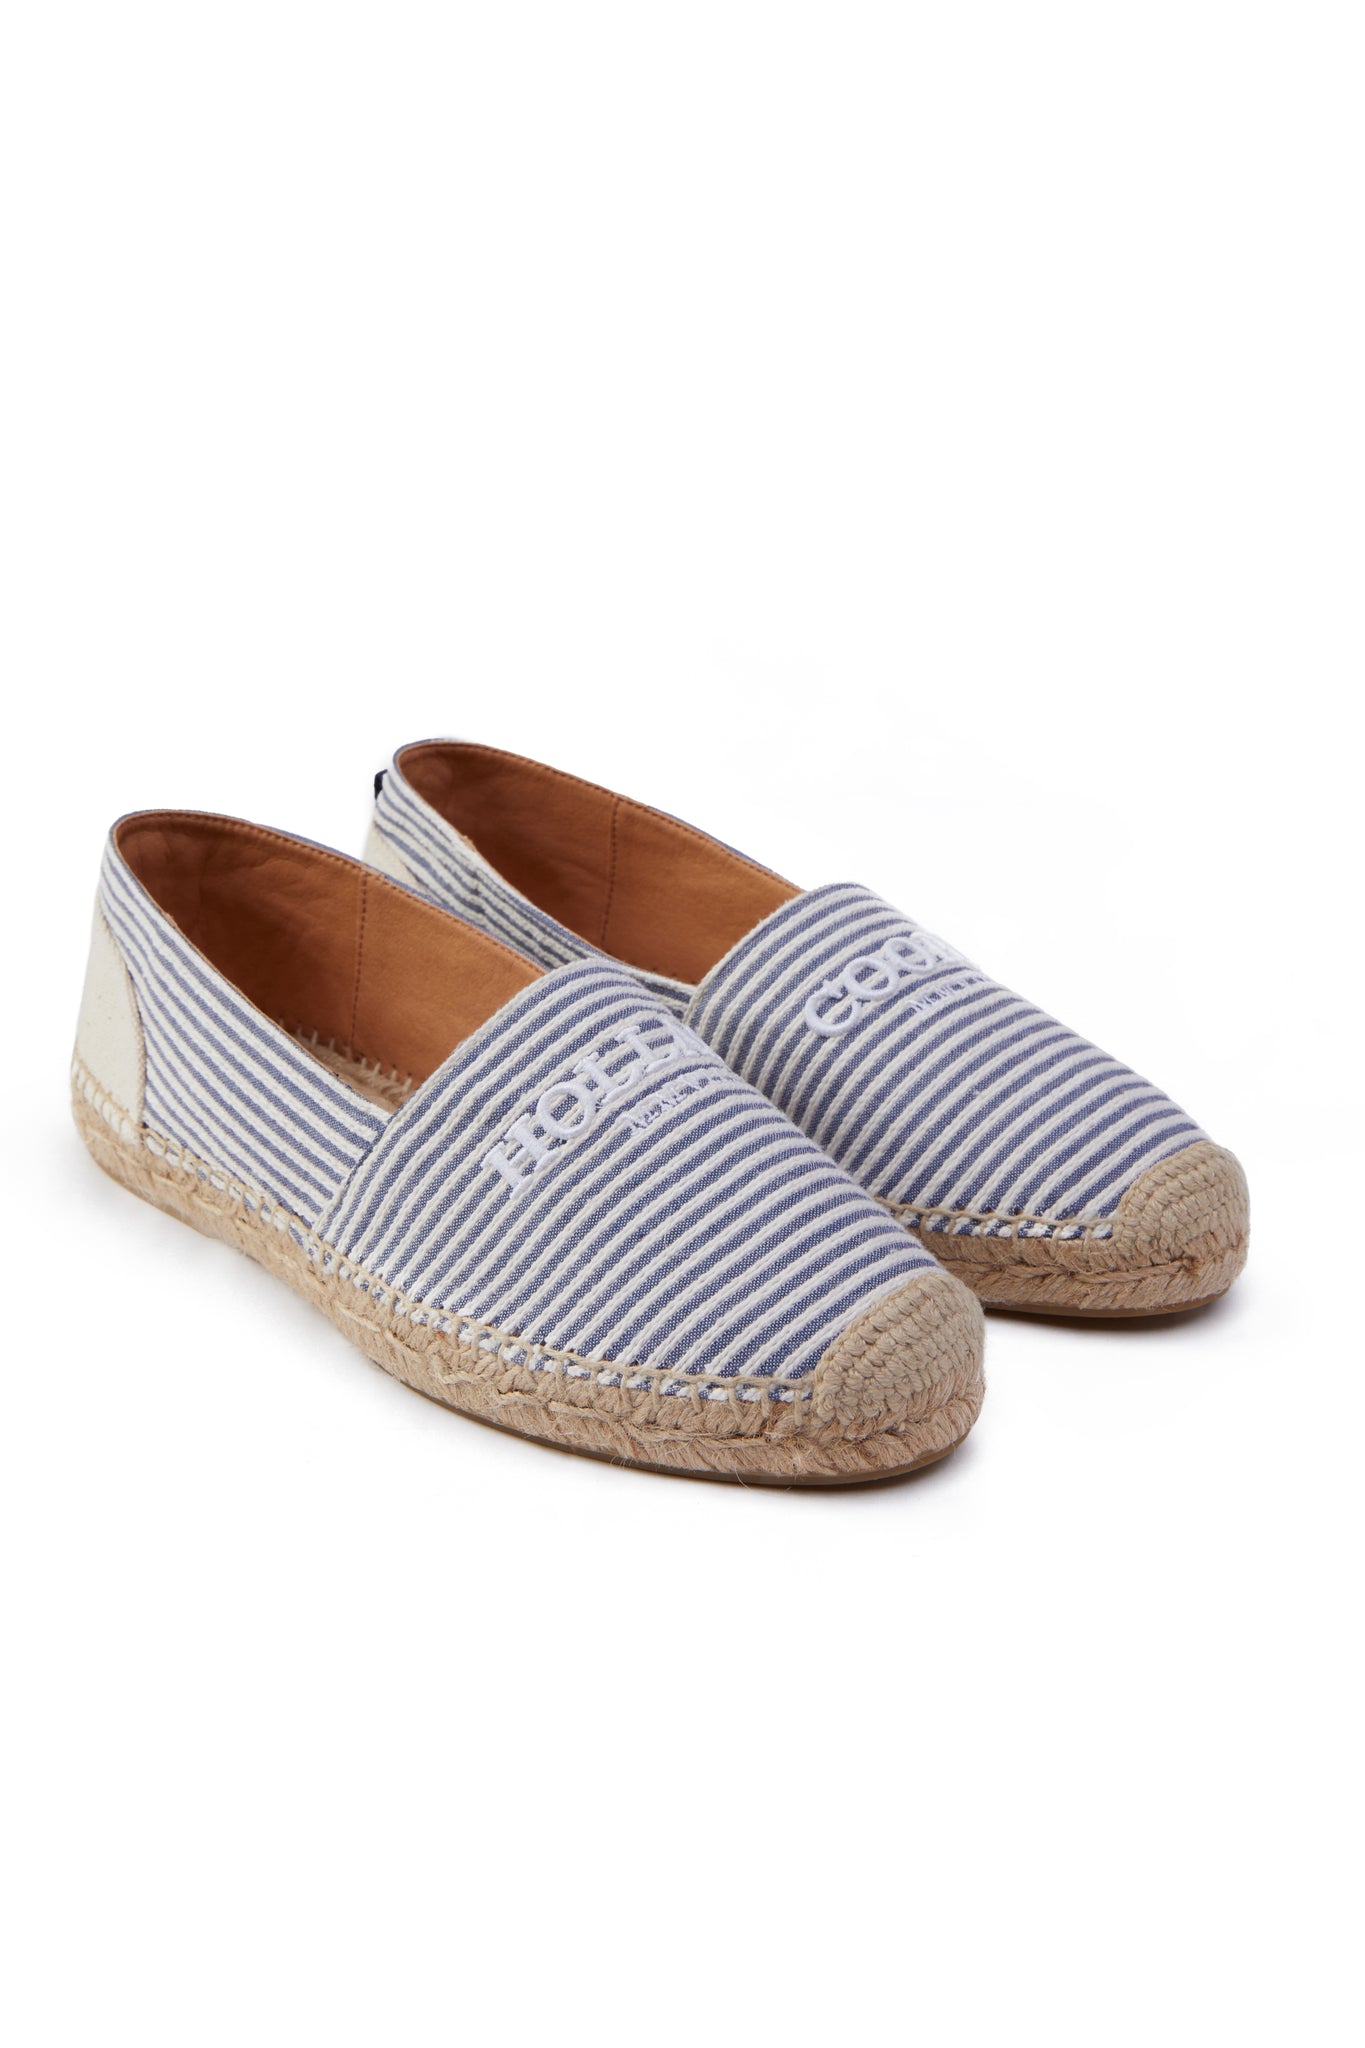 classic style white and blue striped canvas espadrille with plaited jute sole and jute toe cap with white embroidered branding on top